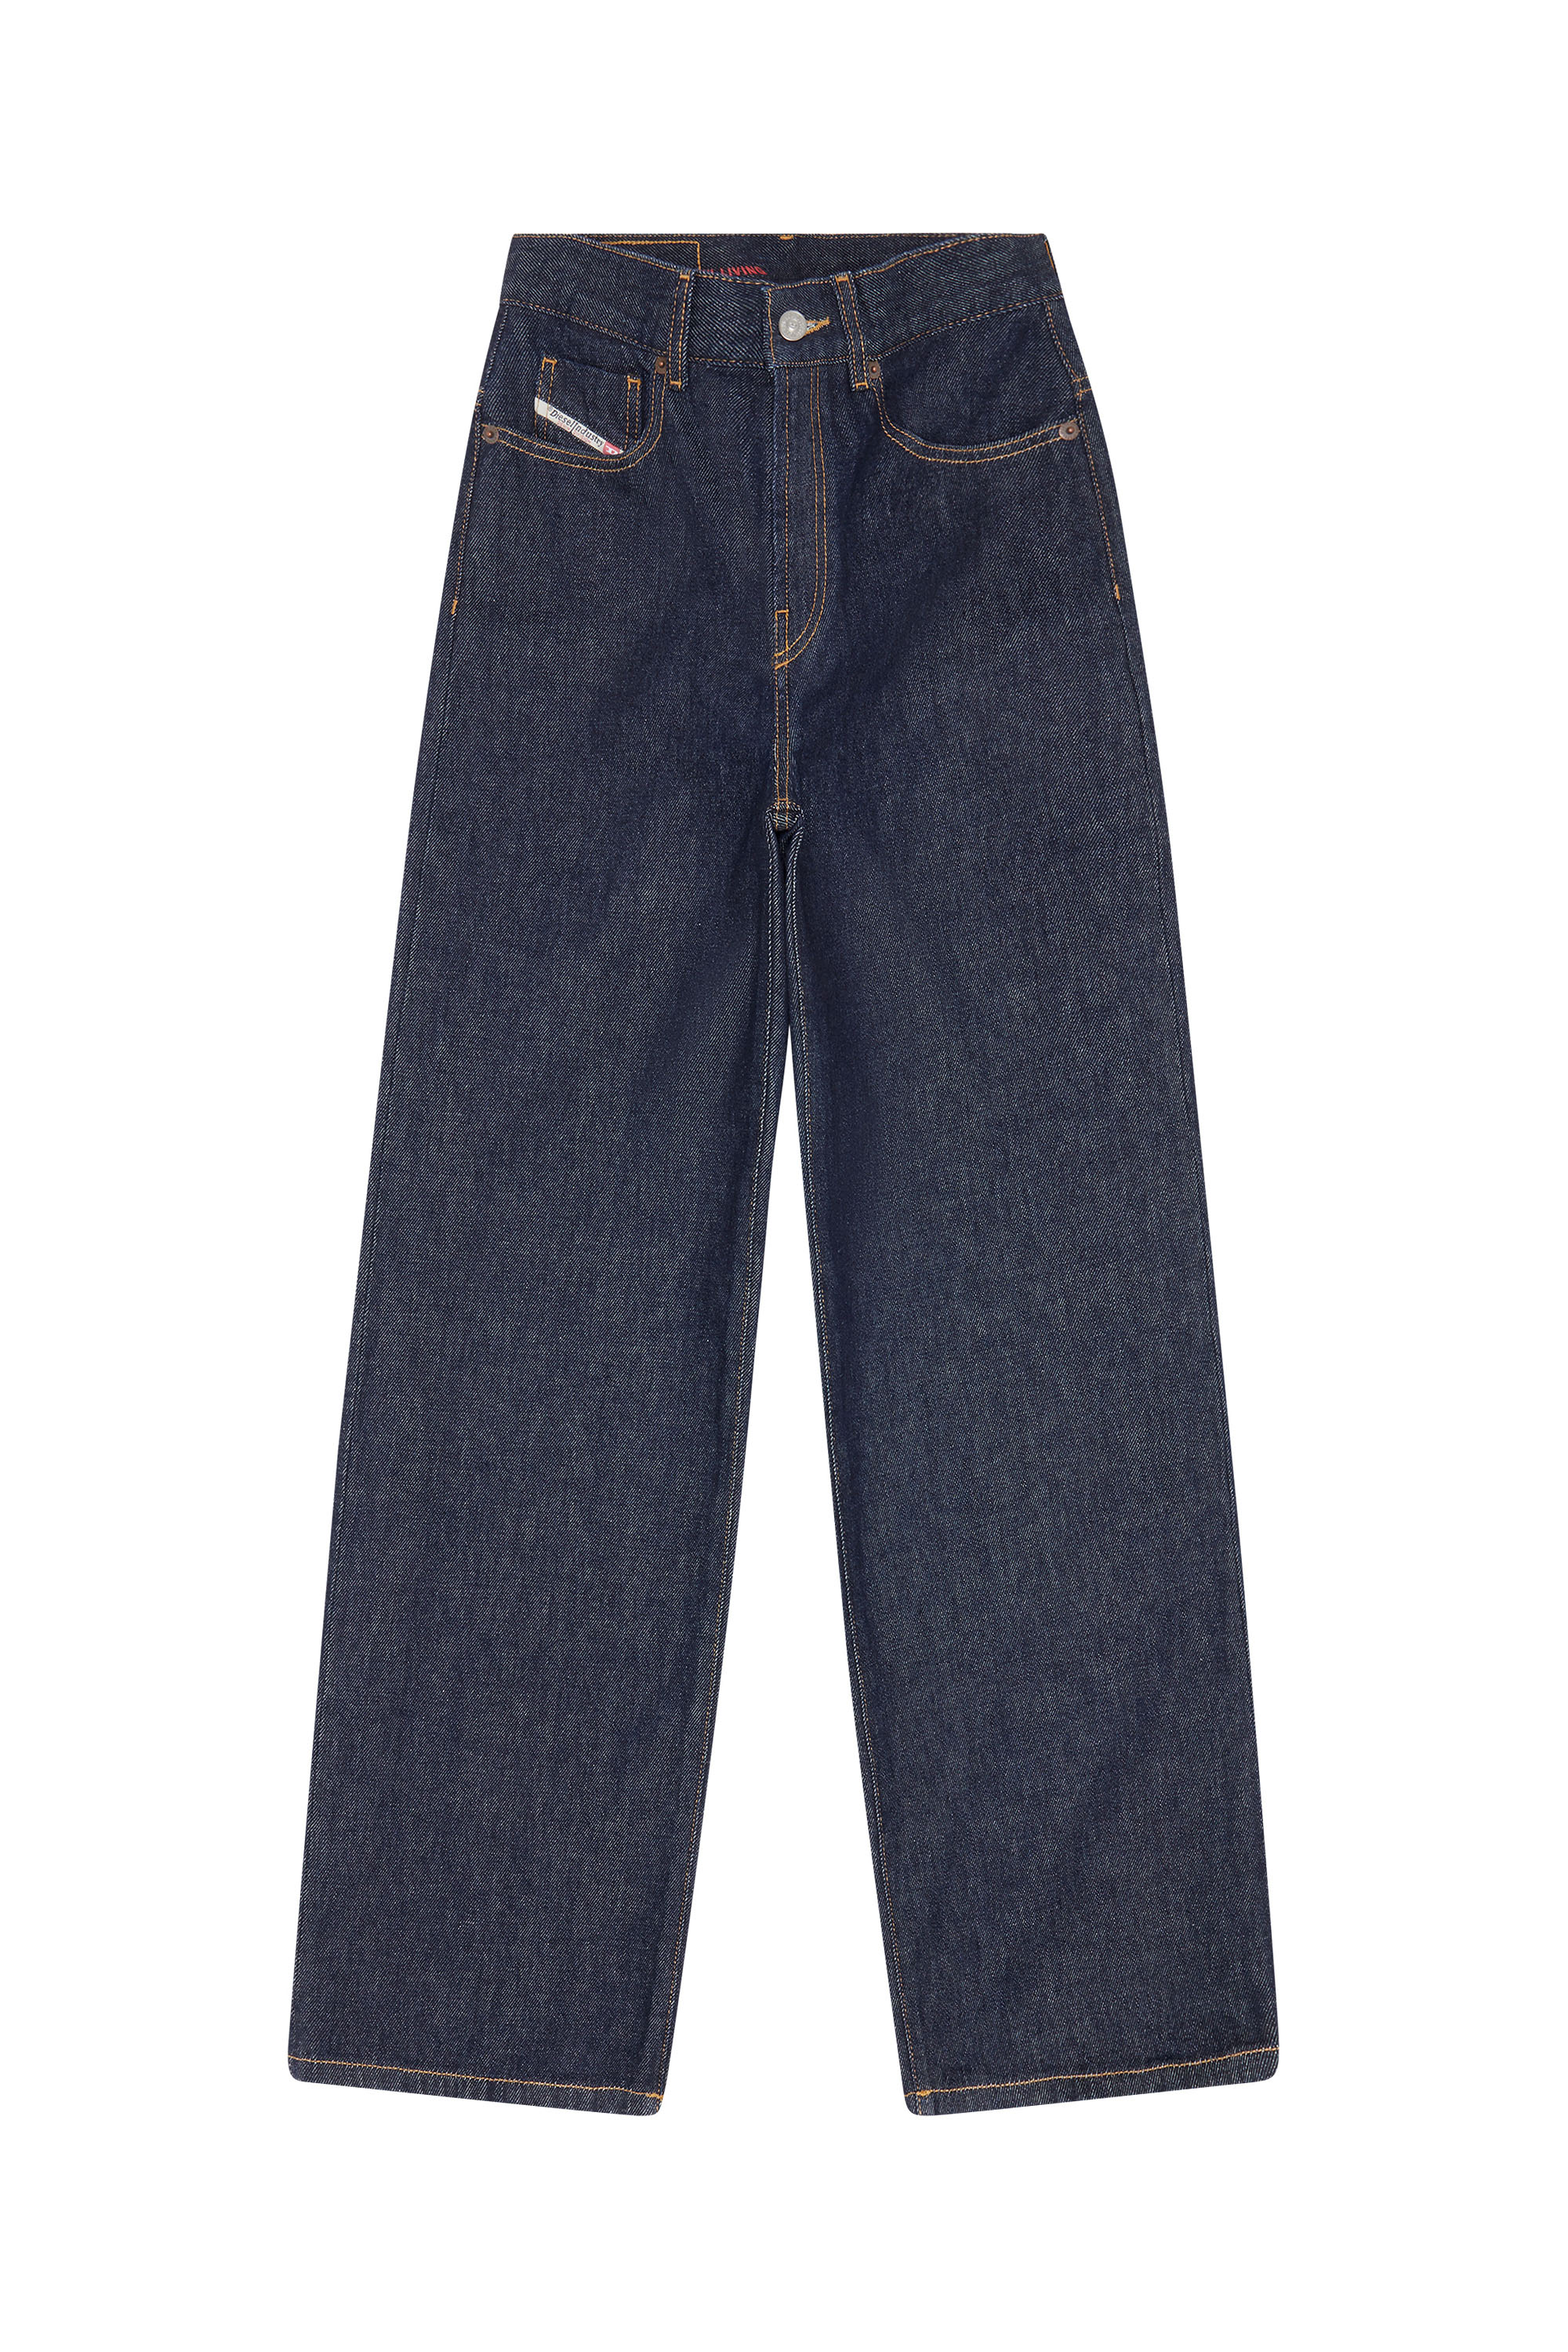 2000 Z9C02 Bootcut and Flare Jeans, Dark Blue - Jeans